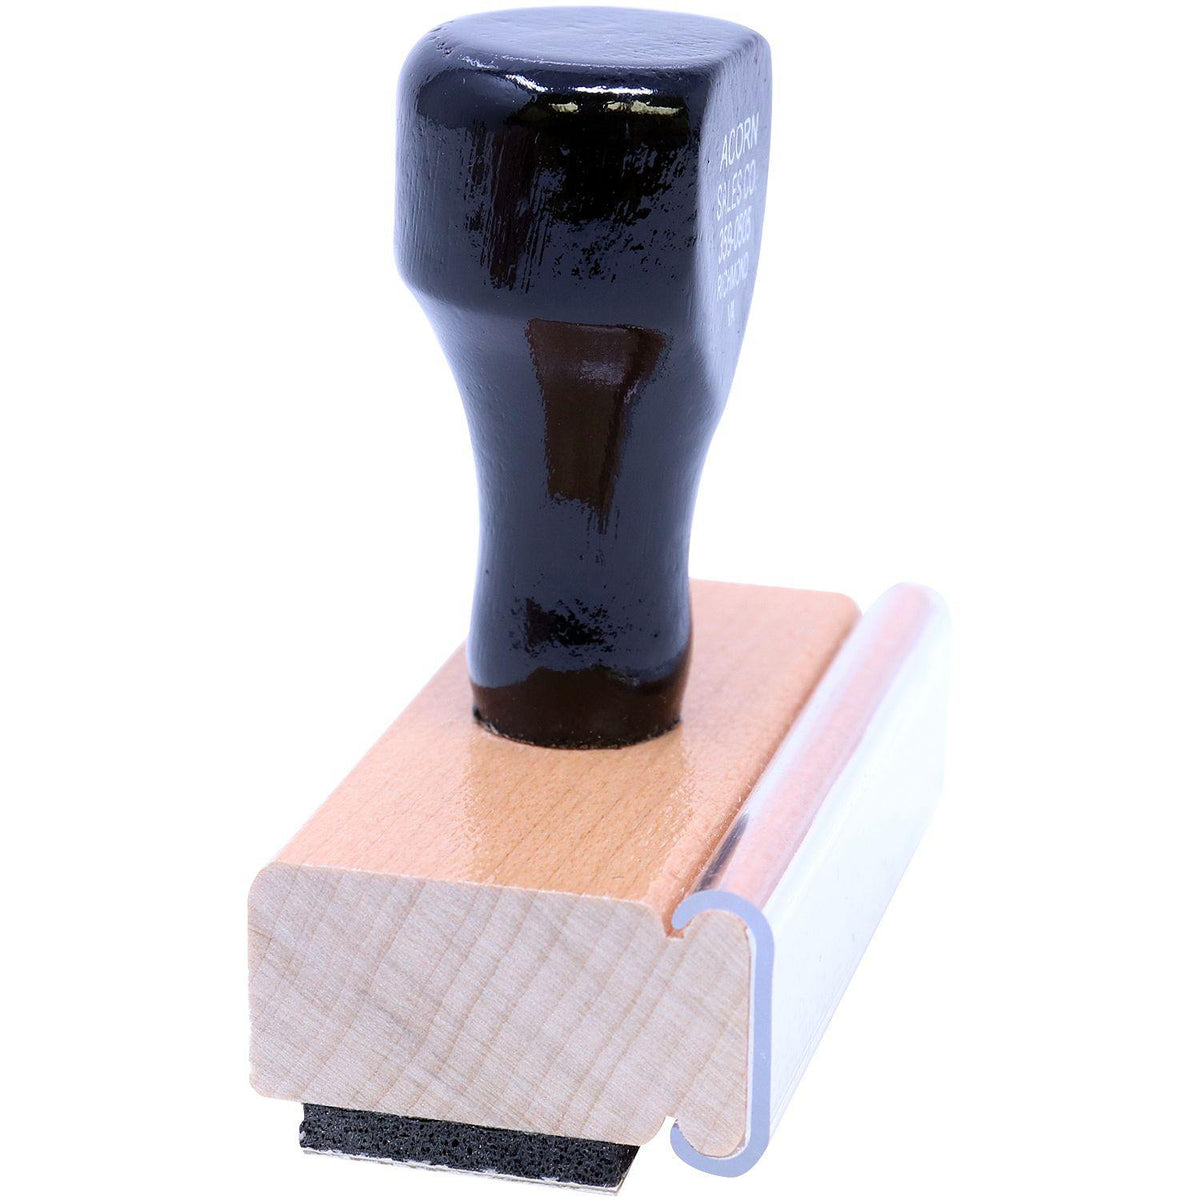 Side View of Large Client Copy Rubber Stamp at an Angle